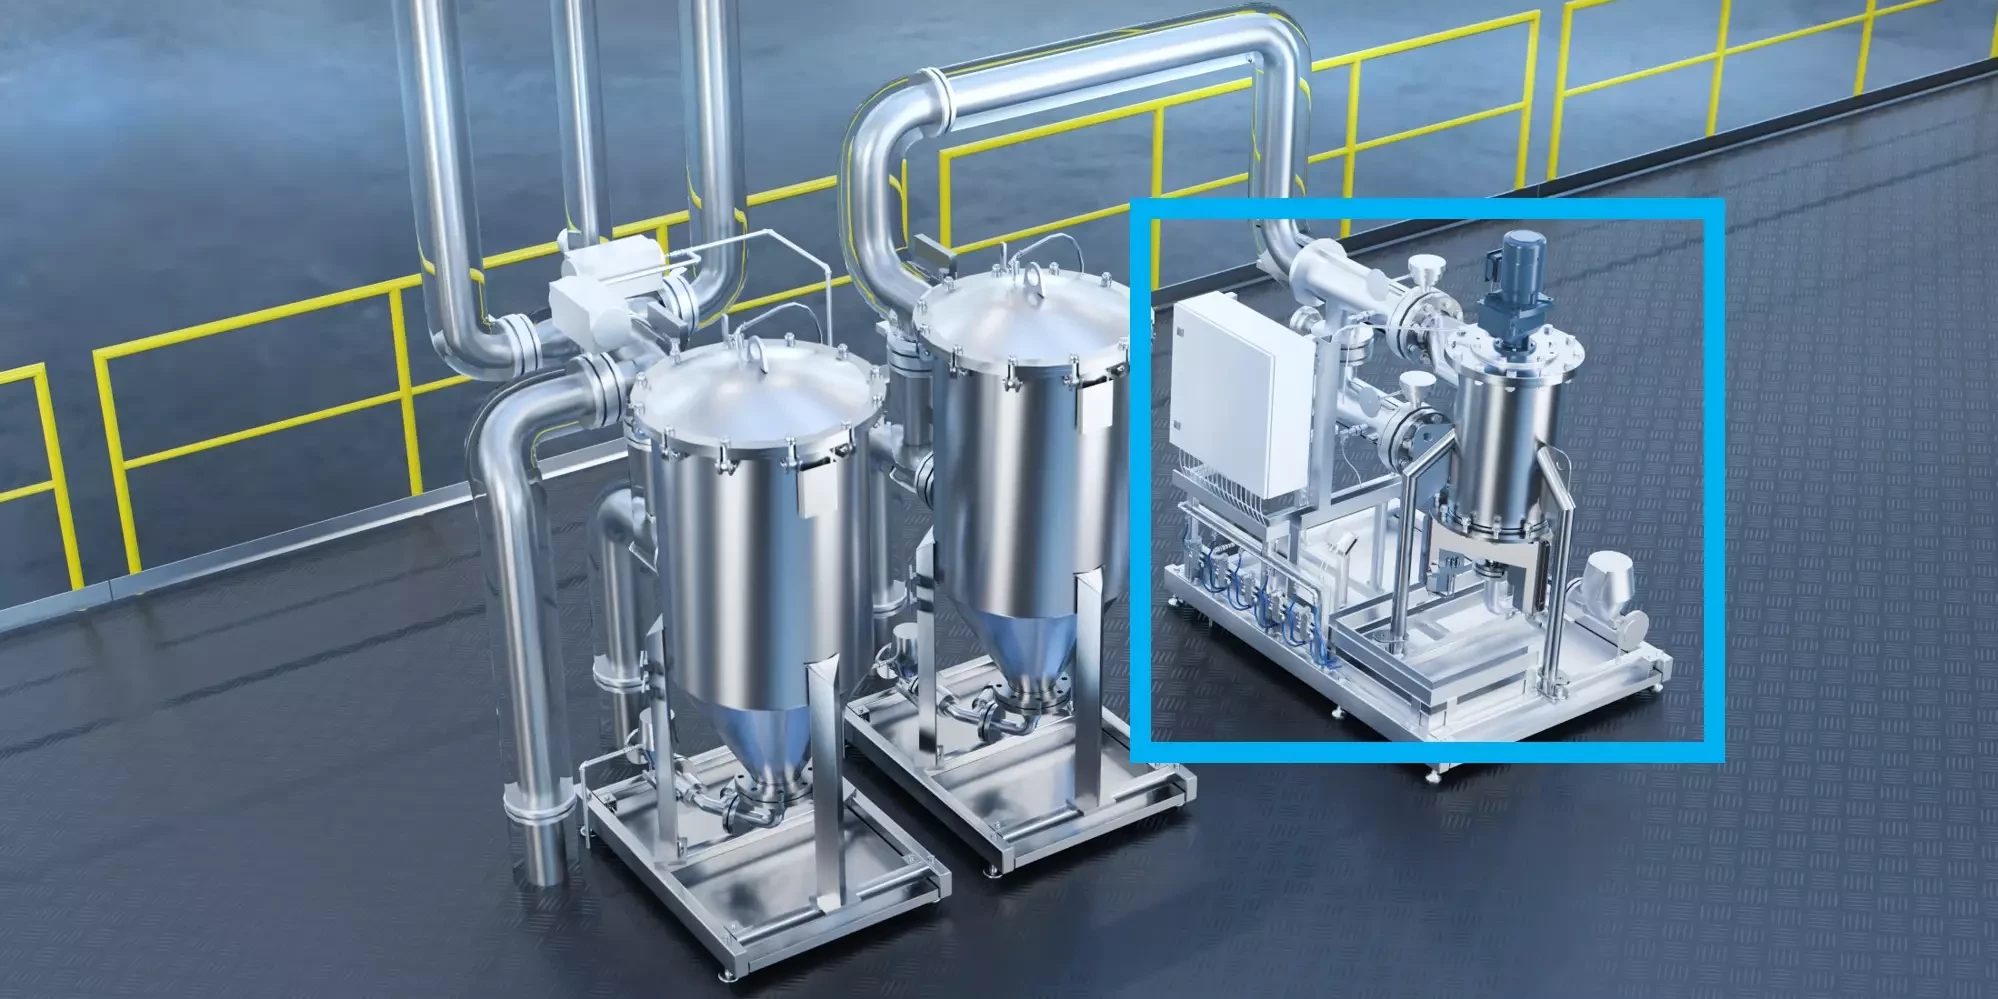 Dürr's bath cleaning includes clean process bath and high-quality coating